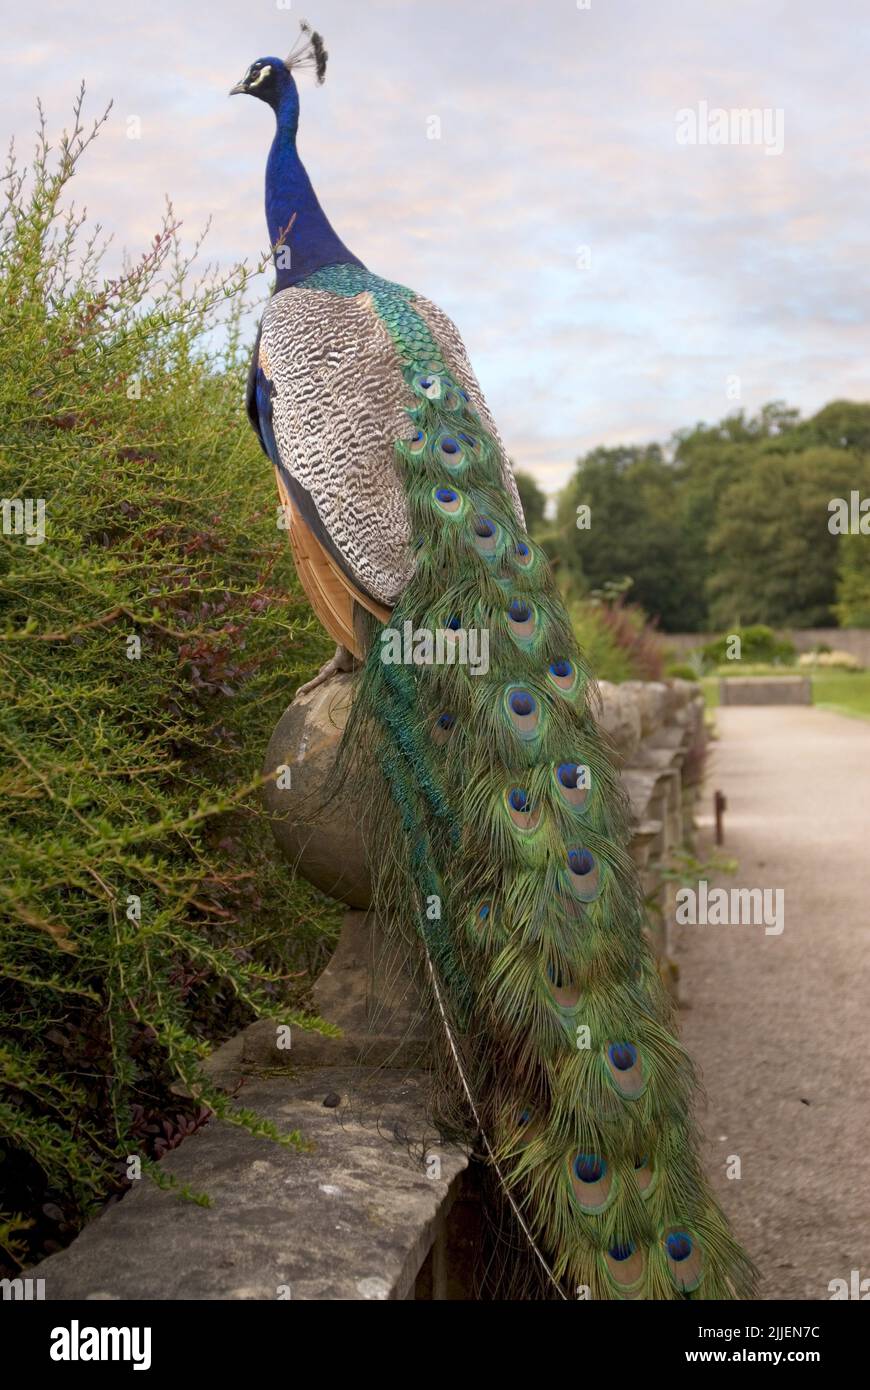 Common peafowl, Indian peafowl, blue peafowl (Pavo cristatus), male stands on a wall, United Kingdom, England Stock Photo